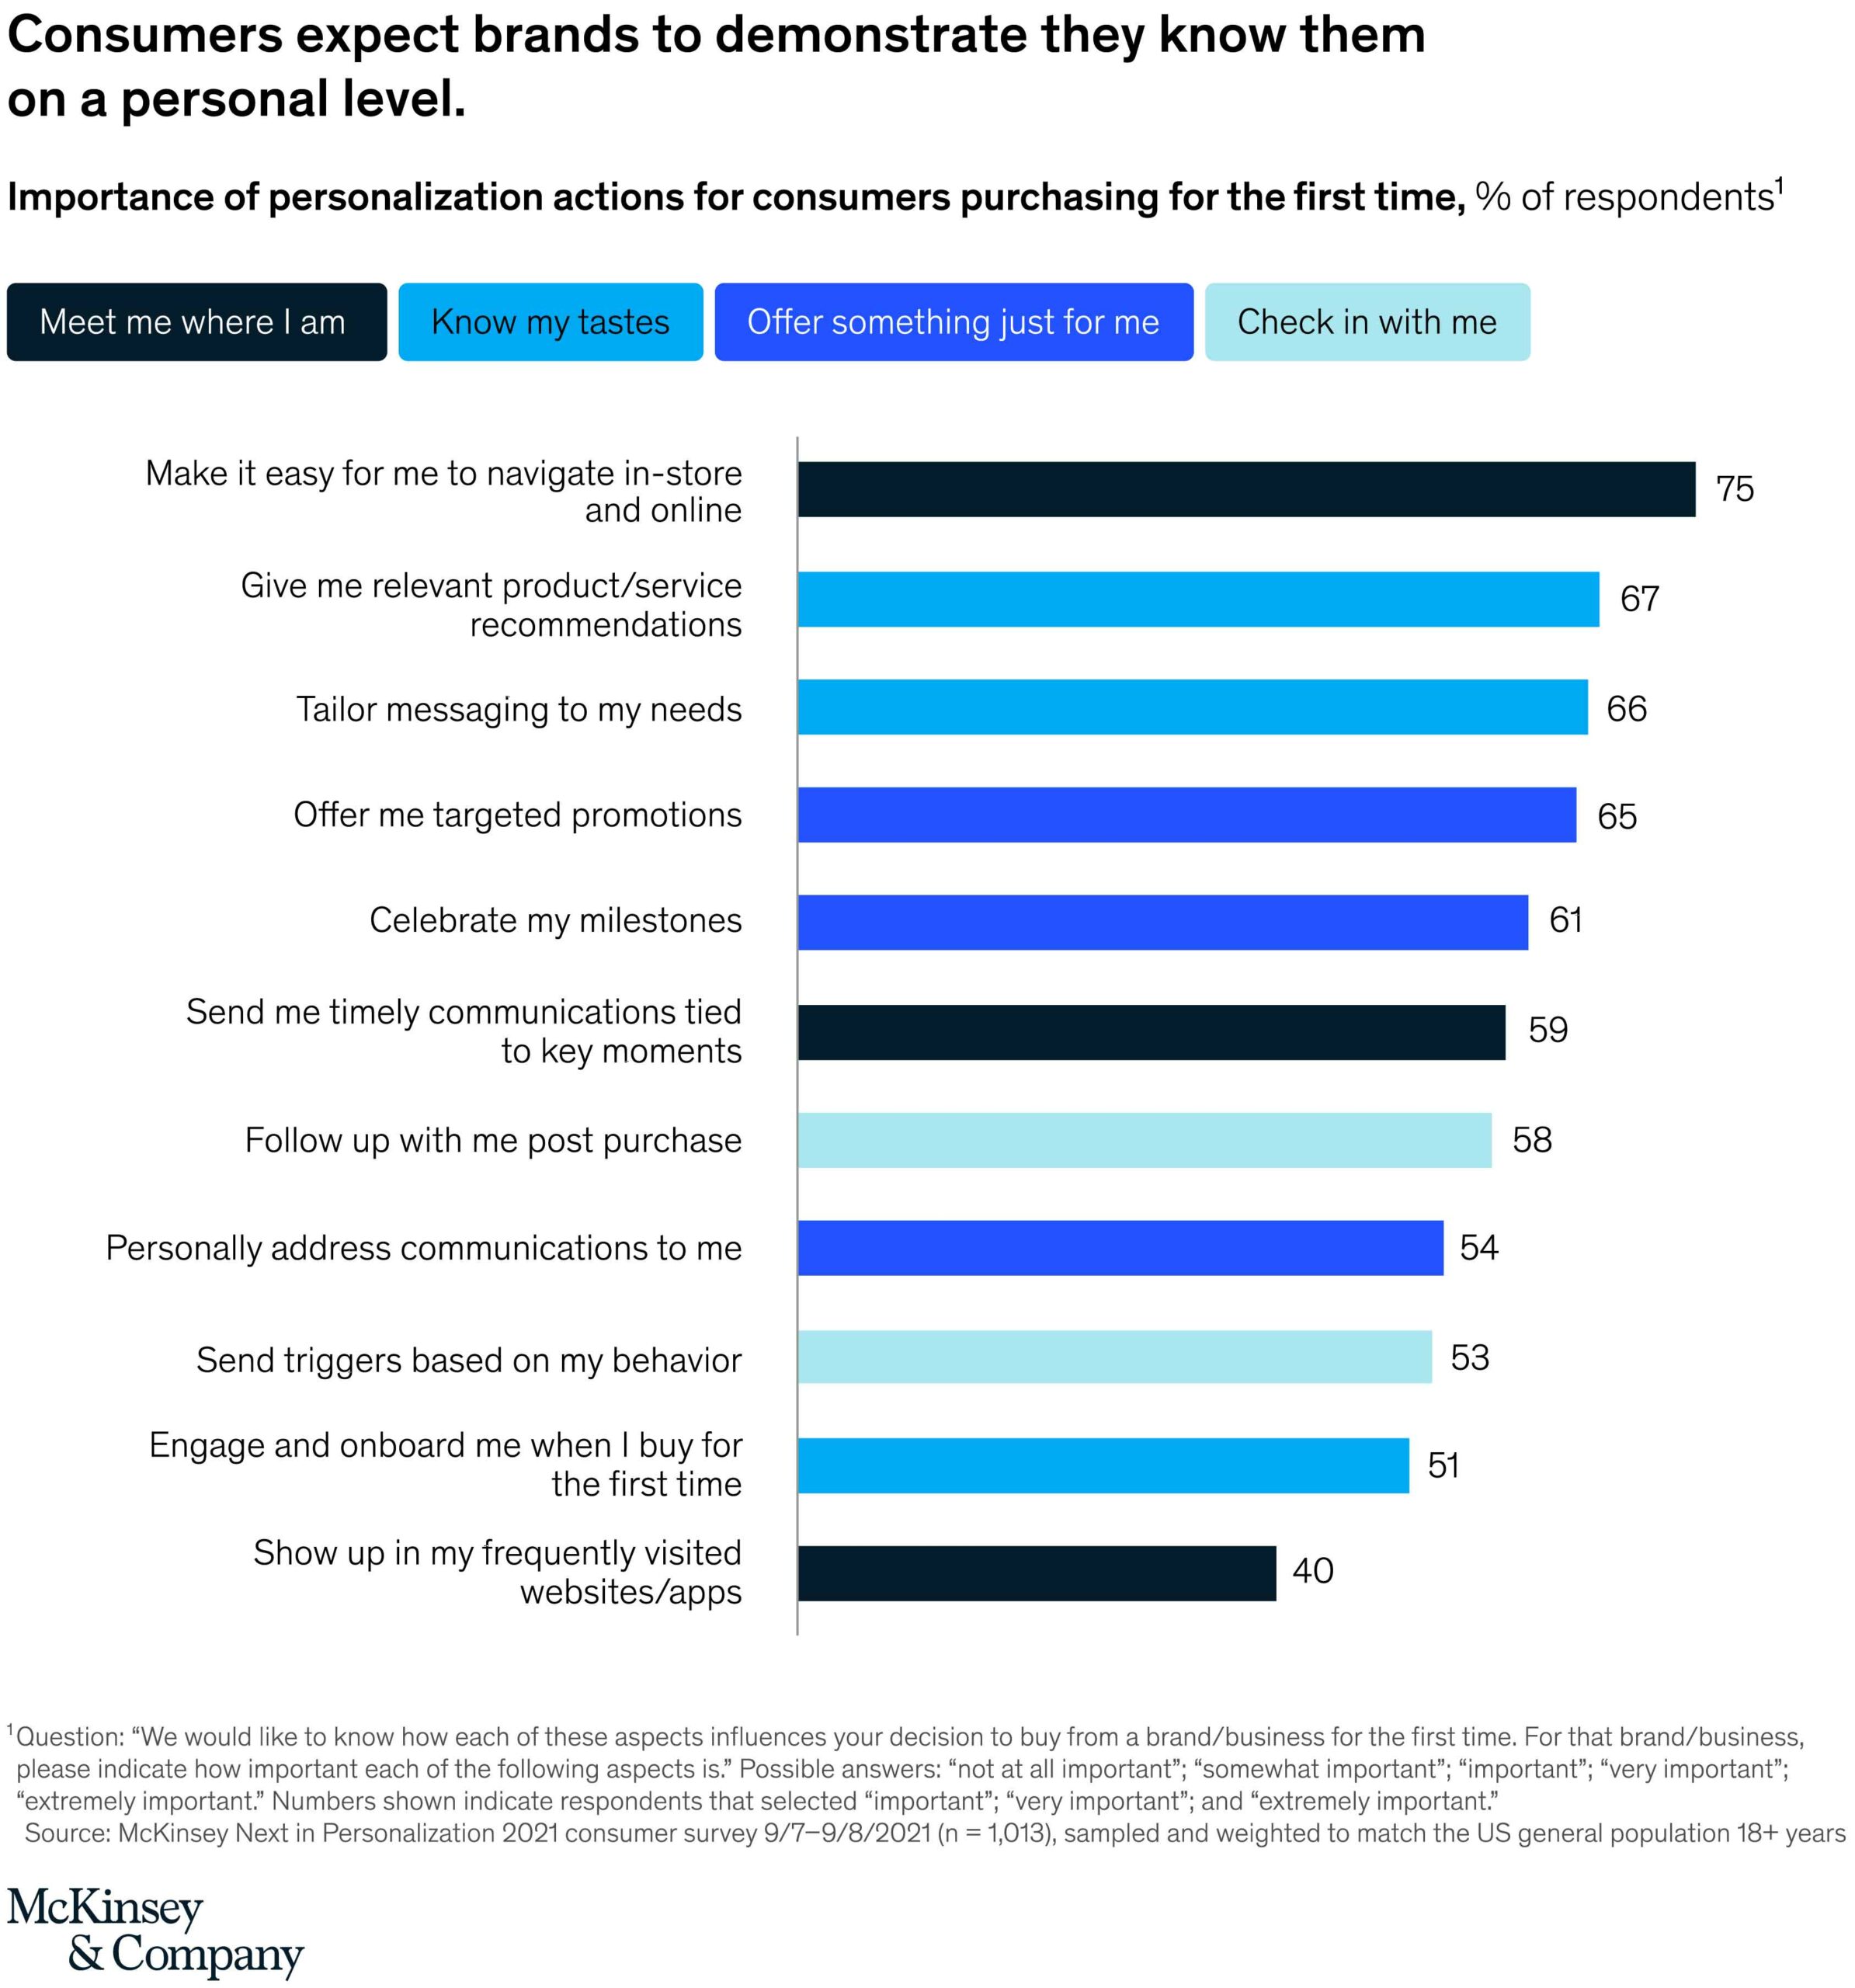 Consumers expect brands to demonstrate they know them